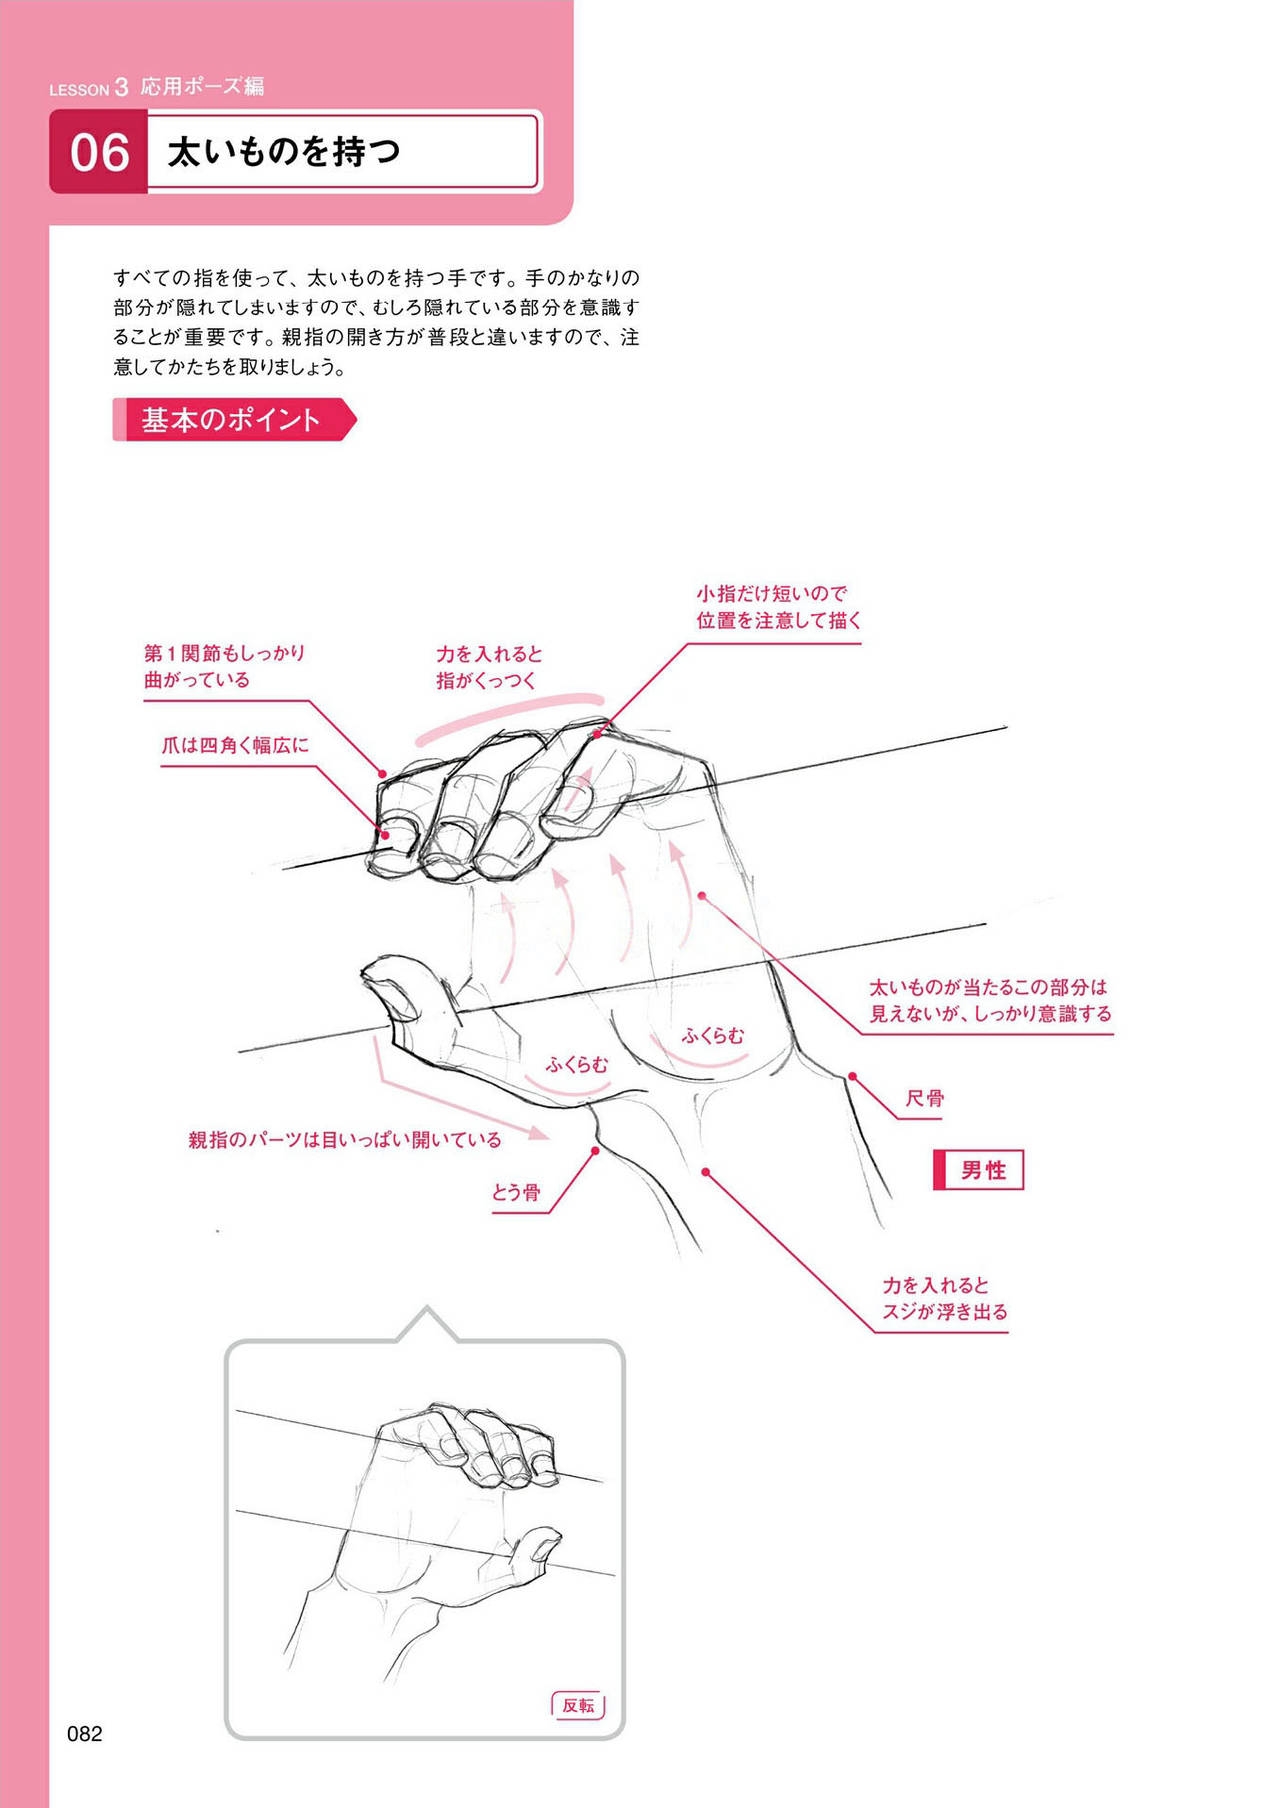 How to draw hands 82